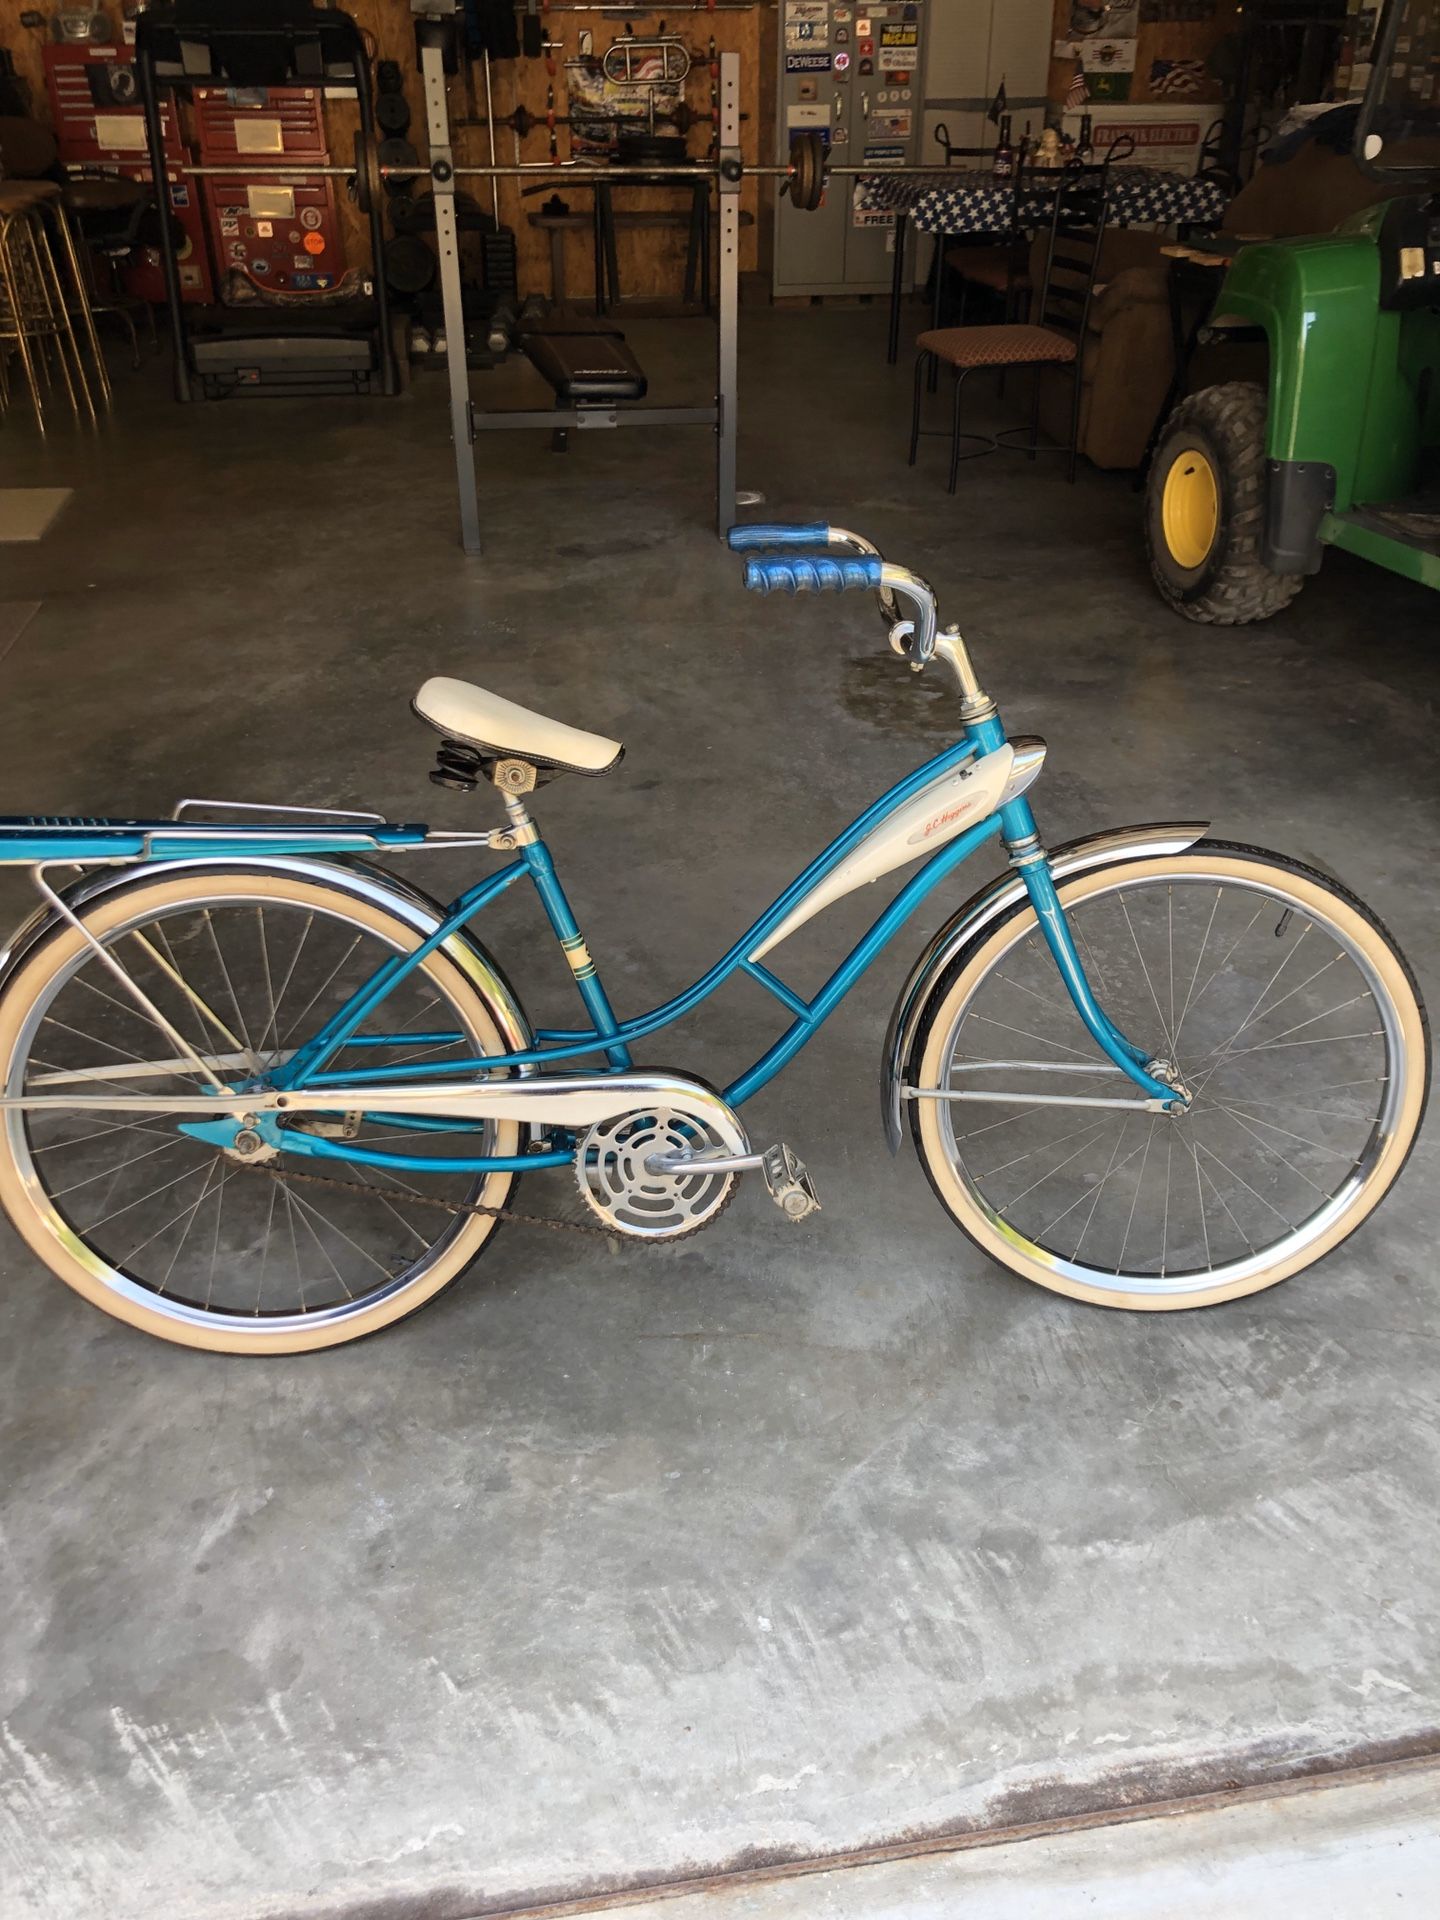 1964 JC Higgins bicycle. Bought from Sears. Excellent condition.